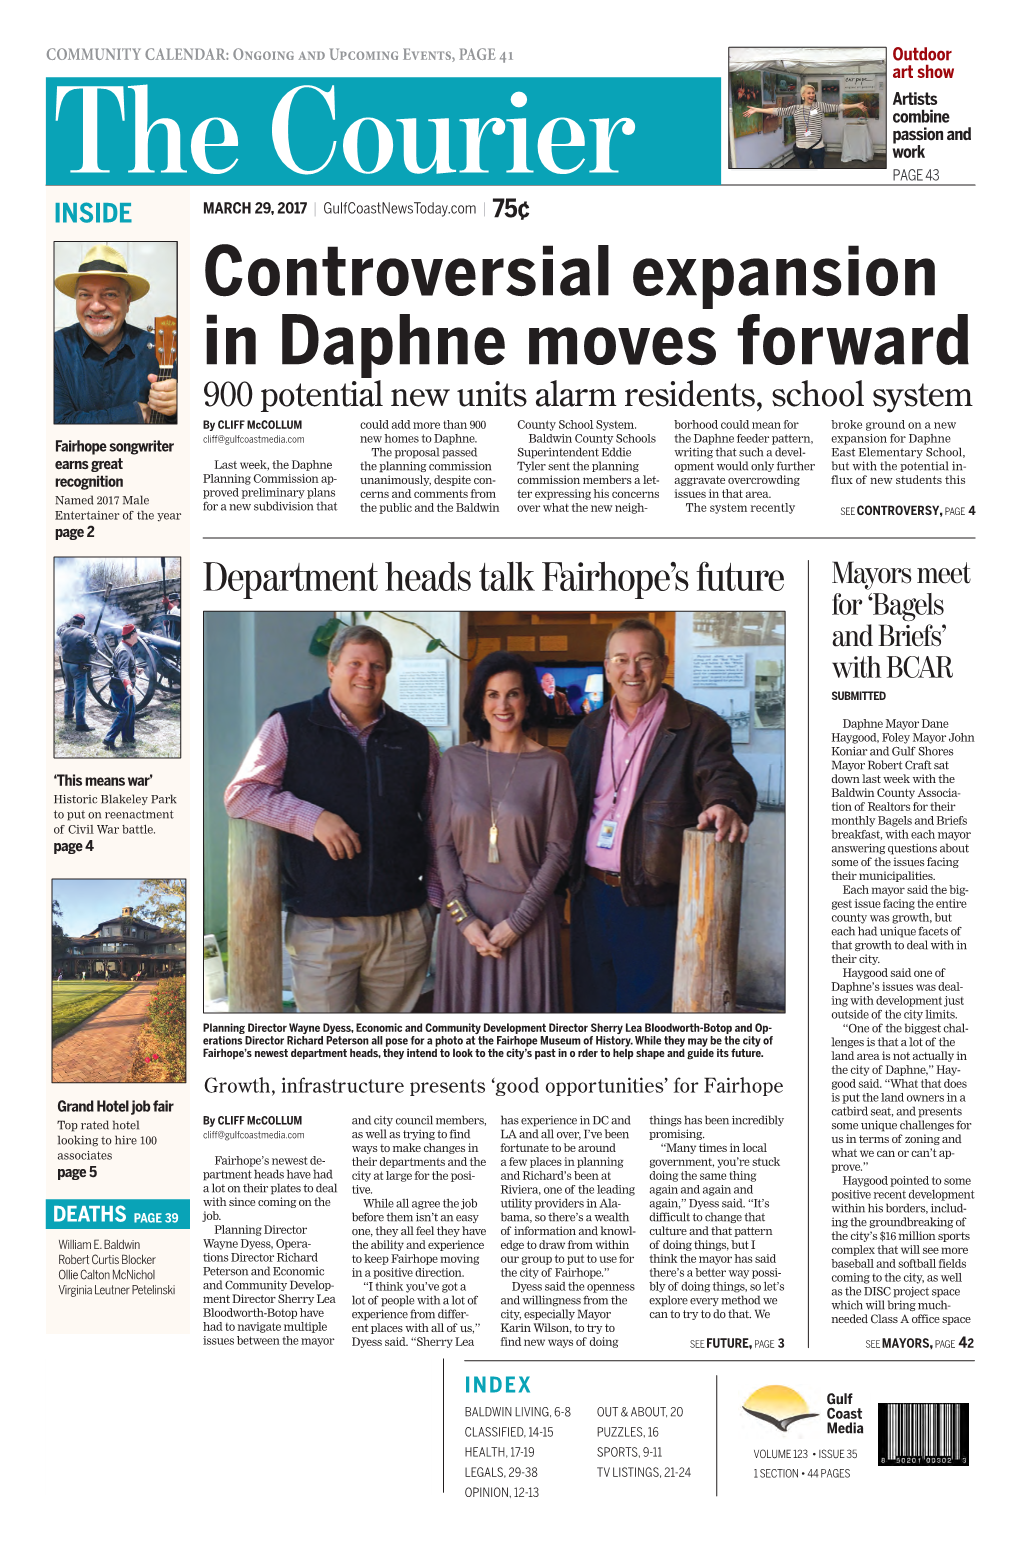 Controversial Expansion in Daphne Moves Forward 900 Potential New Units Alarm Residents, School System by CLIFF Mccollum Could Add More Than 900 County School System